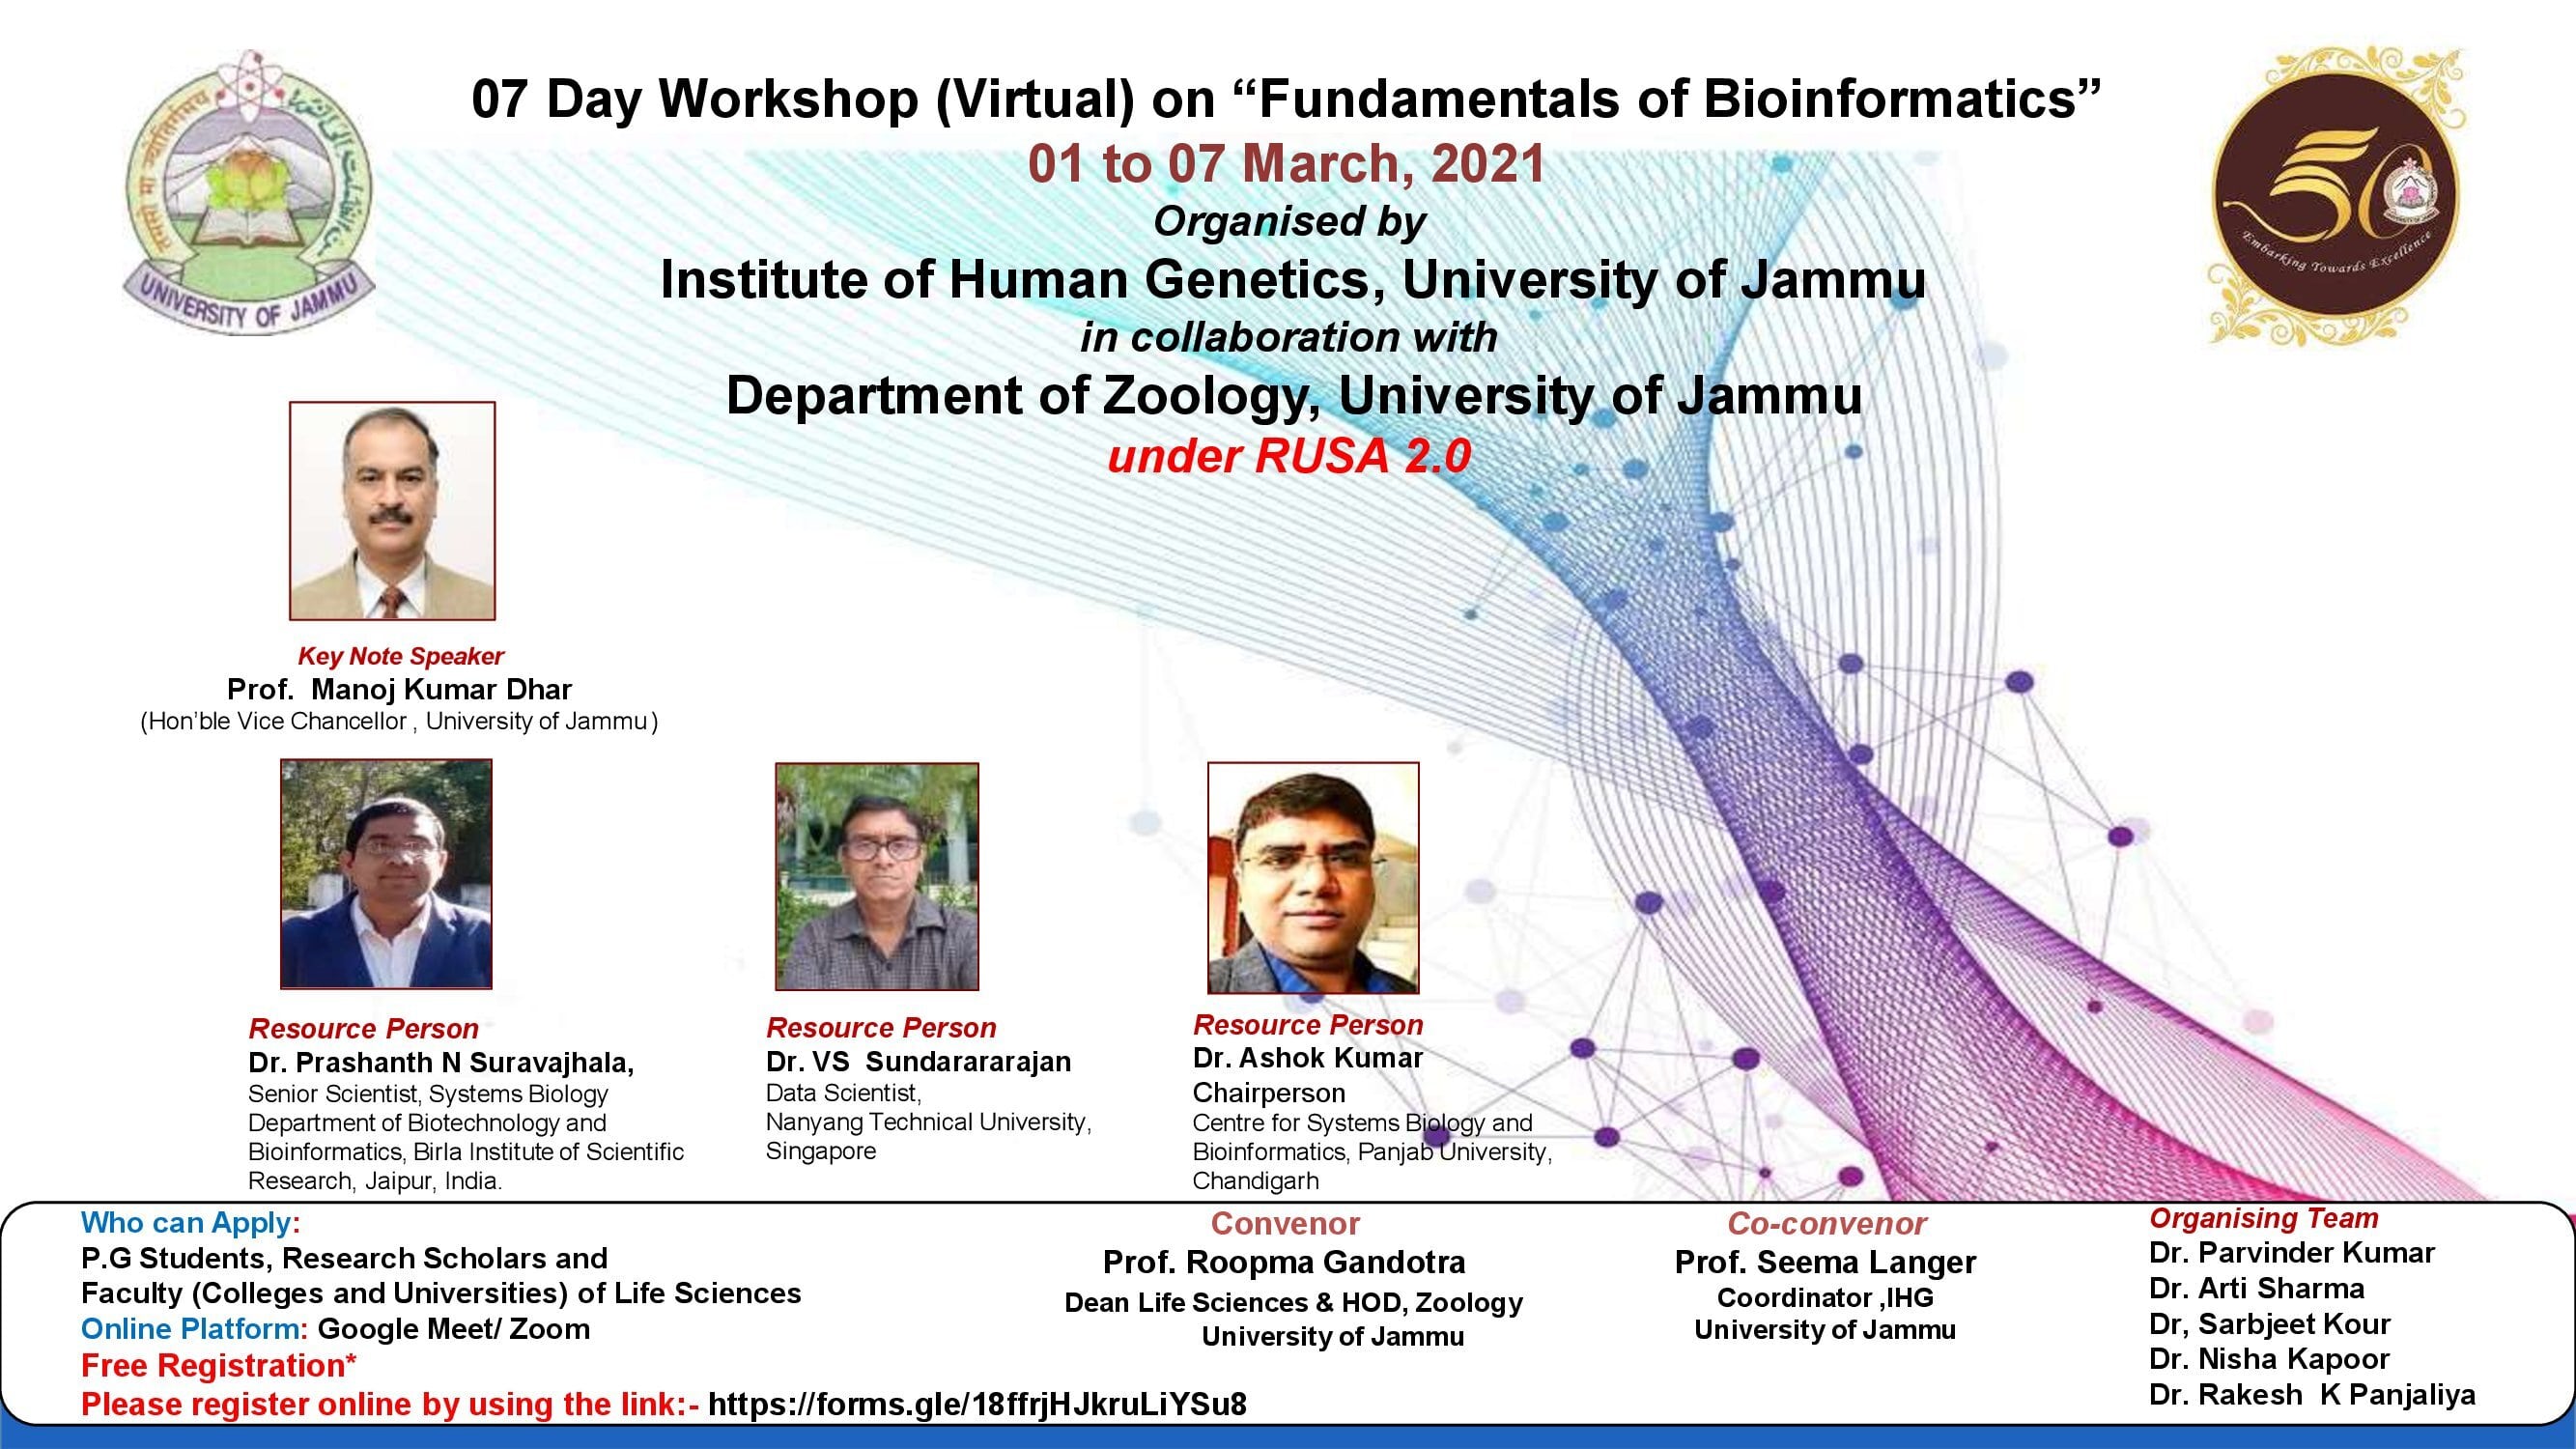 A seven-day workshop (virtual) on “Fundamentals of Bioinformatics” was organized from 1st to 7th March 2021 by the Department of Zoology, University of Jammu in collaboration with the Institute of Human Genetics, University of Jammu.